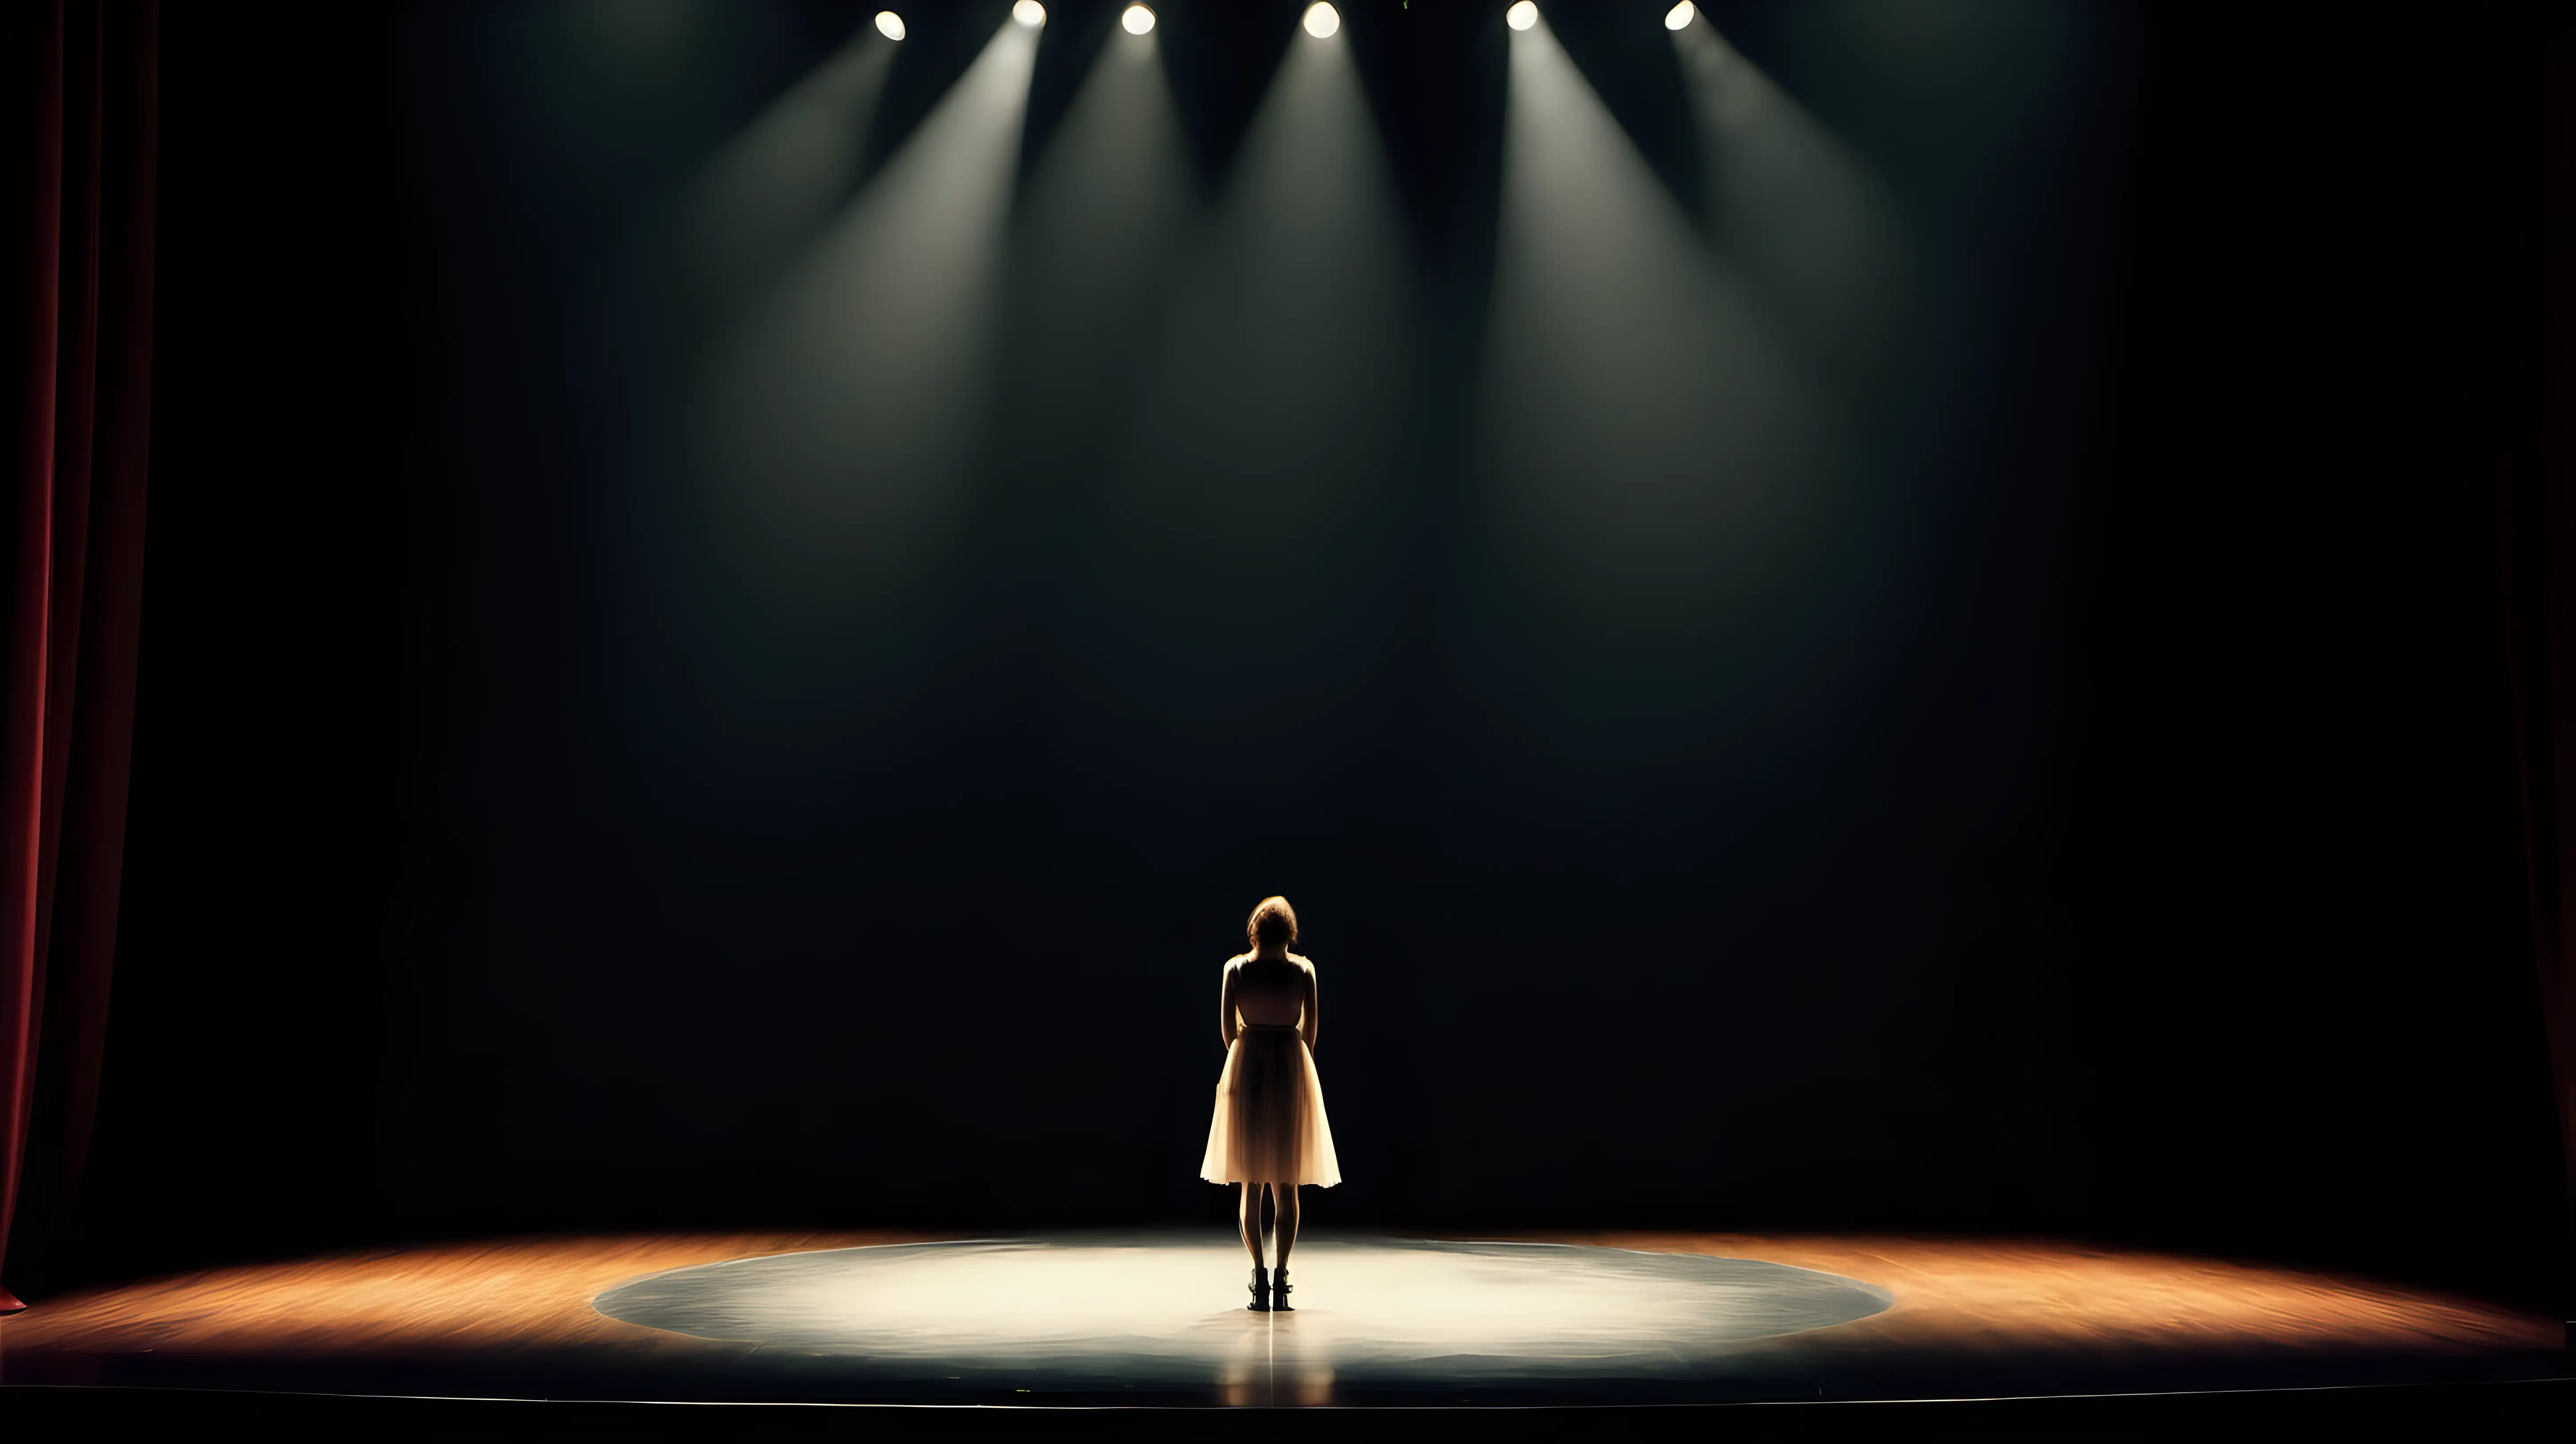 Solo Performer in Spotlight Singing Emotionally on Empty Stage